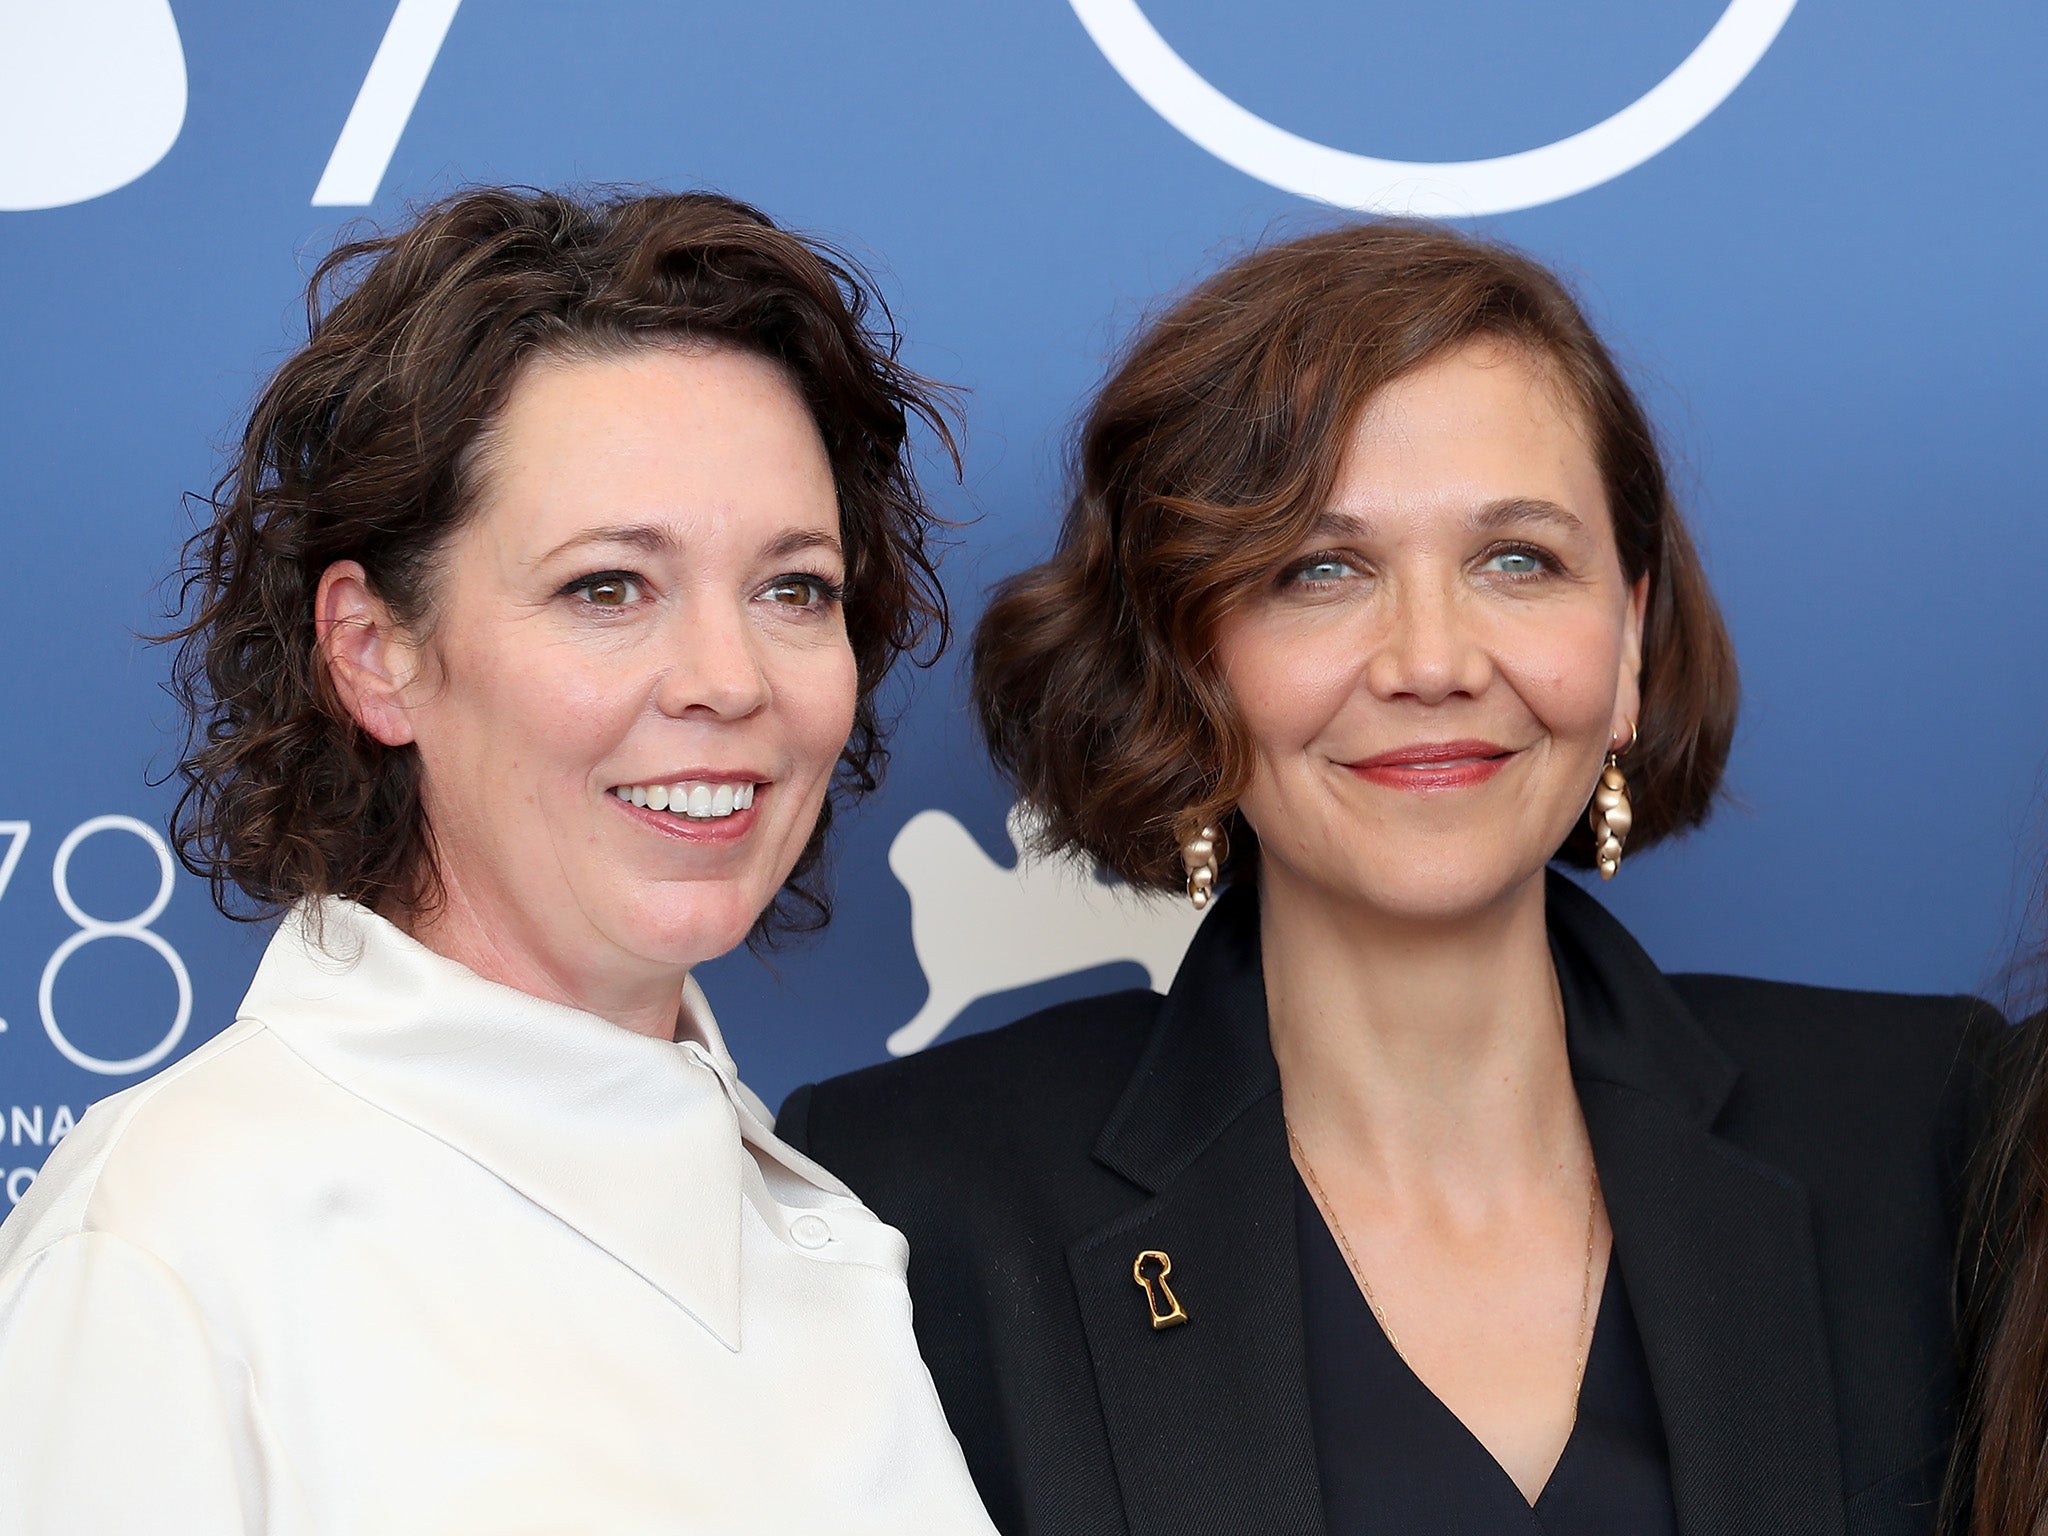 Olivia Colman and Maggie Gyllenhaal at the premiere of ‘The Lost Daughter’ at the 2021 Venice Film Festival